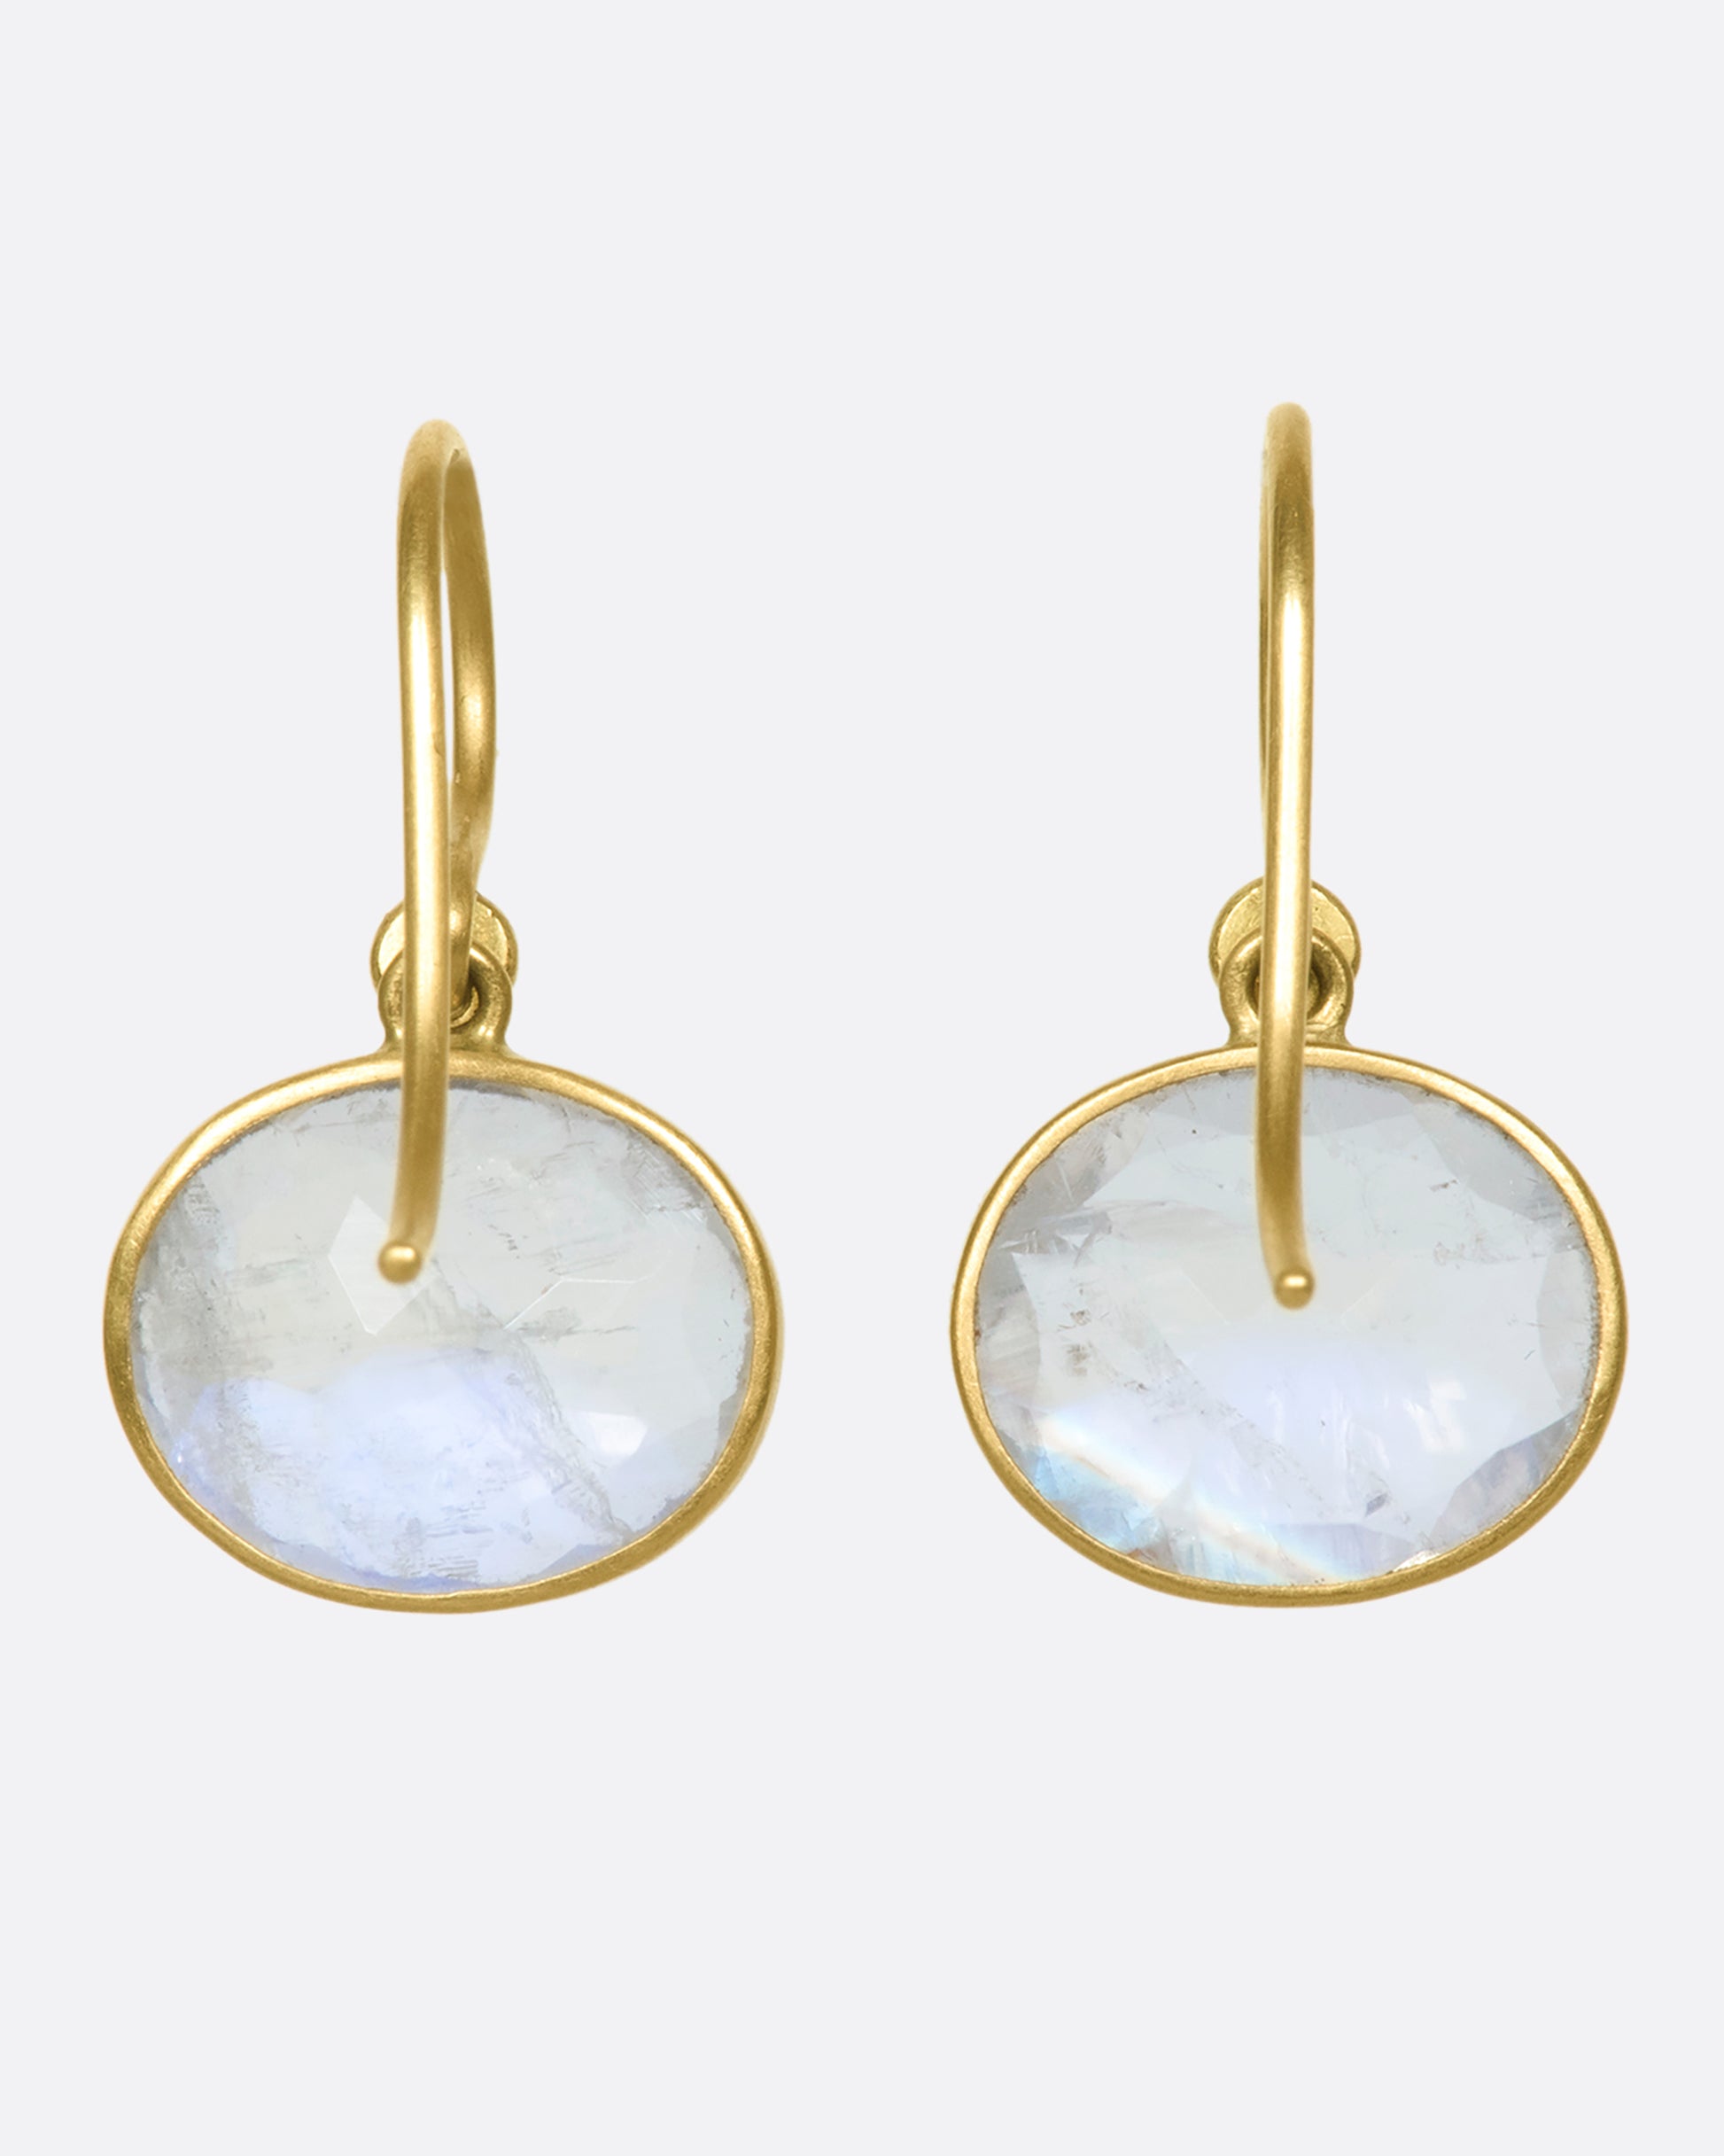 A view of the back of a pair of oval moonstone earrings set in yellow gold bezels.